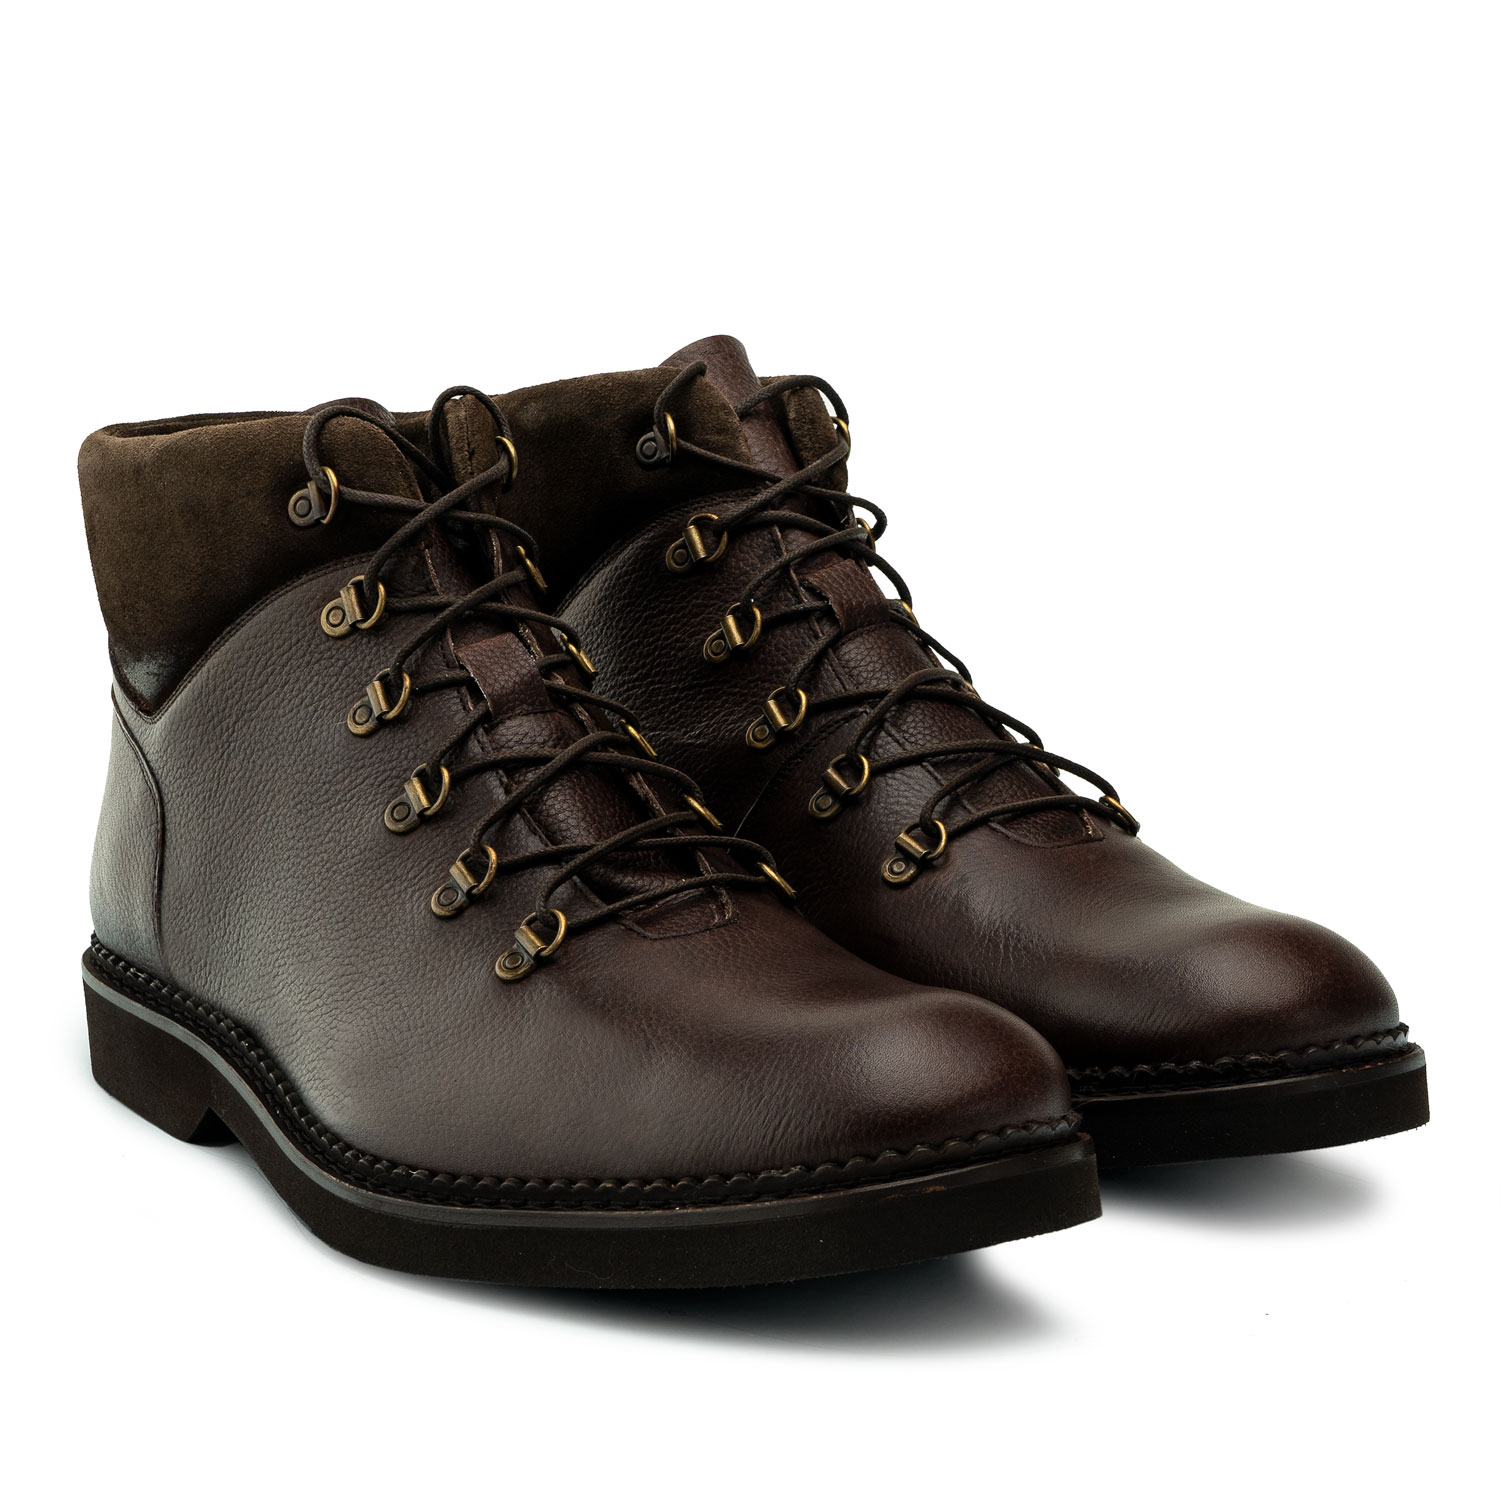 Men's Booties in engraved Brown Leather 